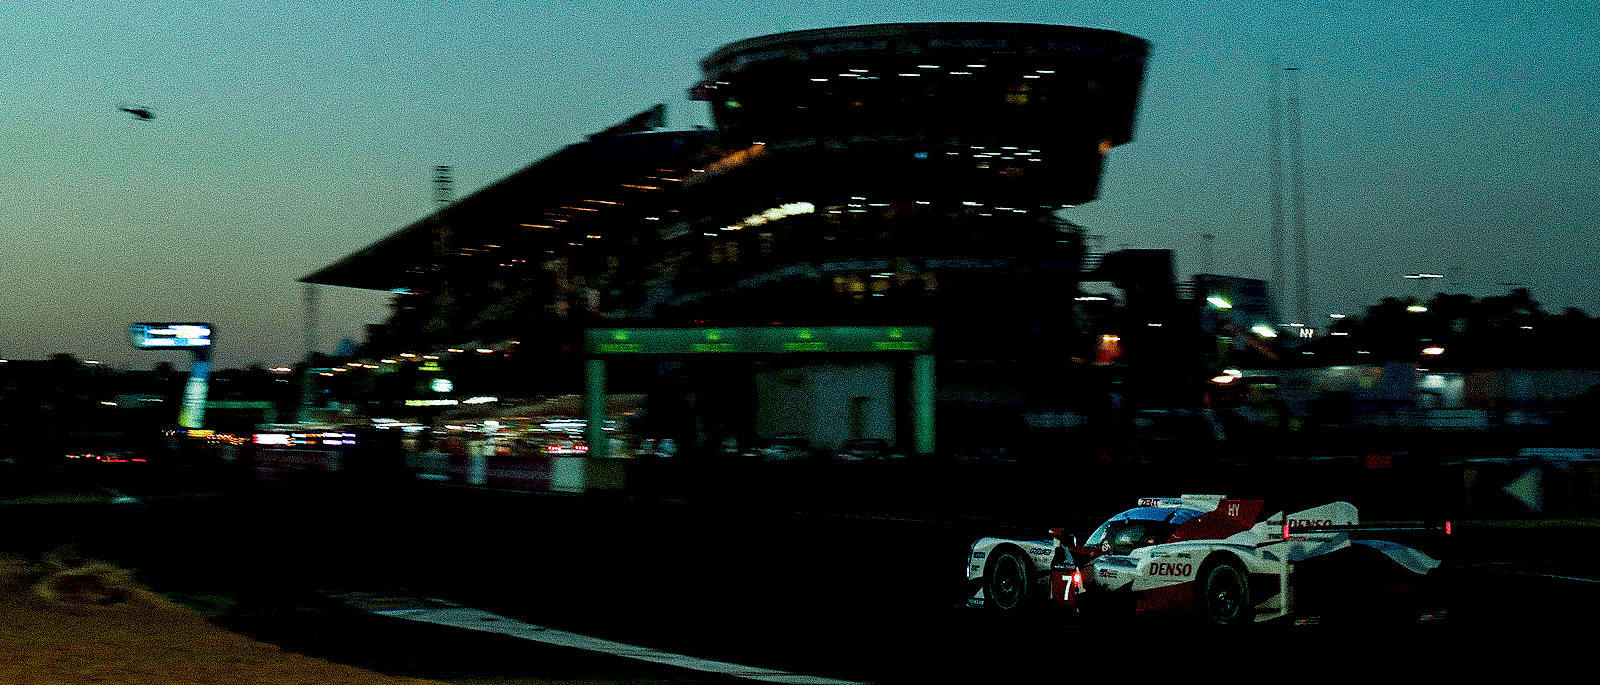 TS050 HYBRID #7 in night session